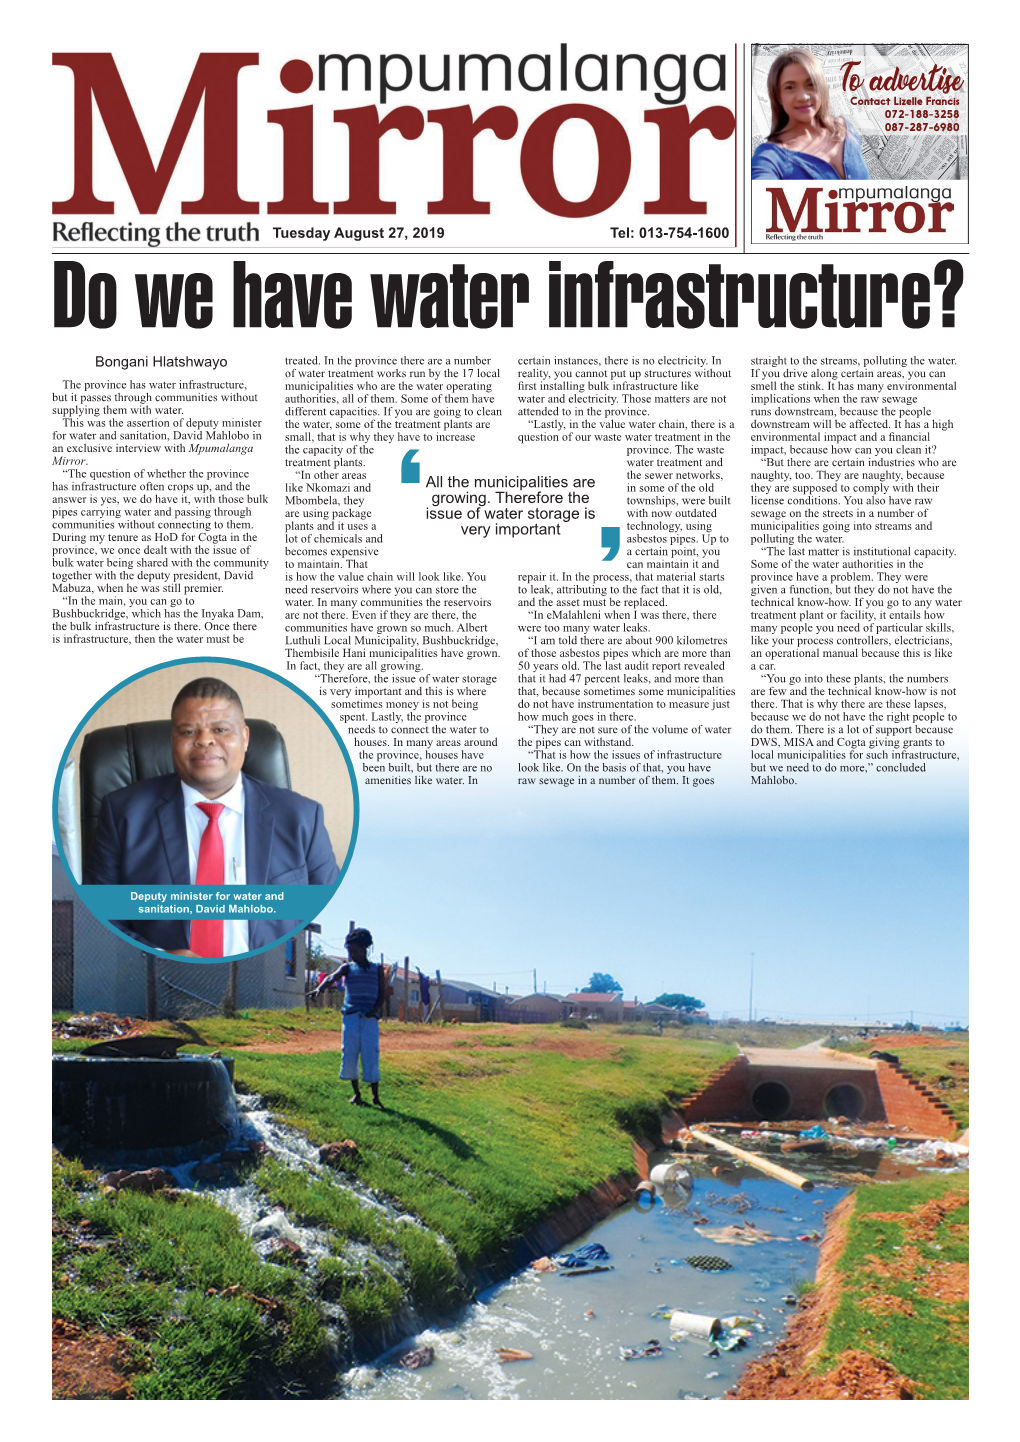 All the Municipalities Are Growing. Therefore the Issue of Water Storage